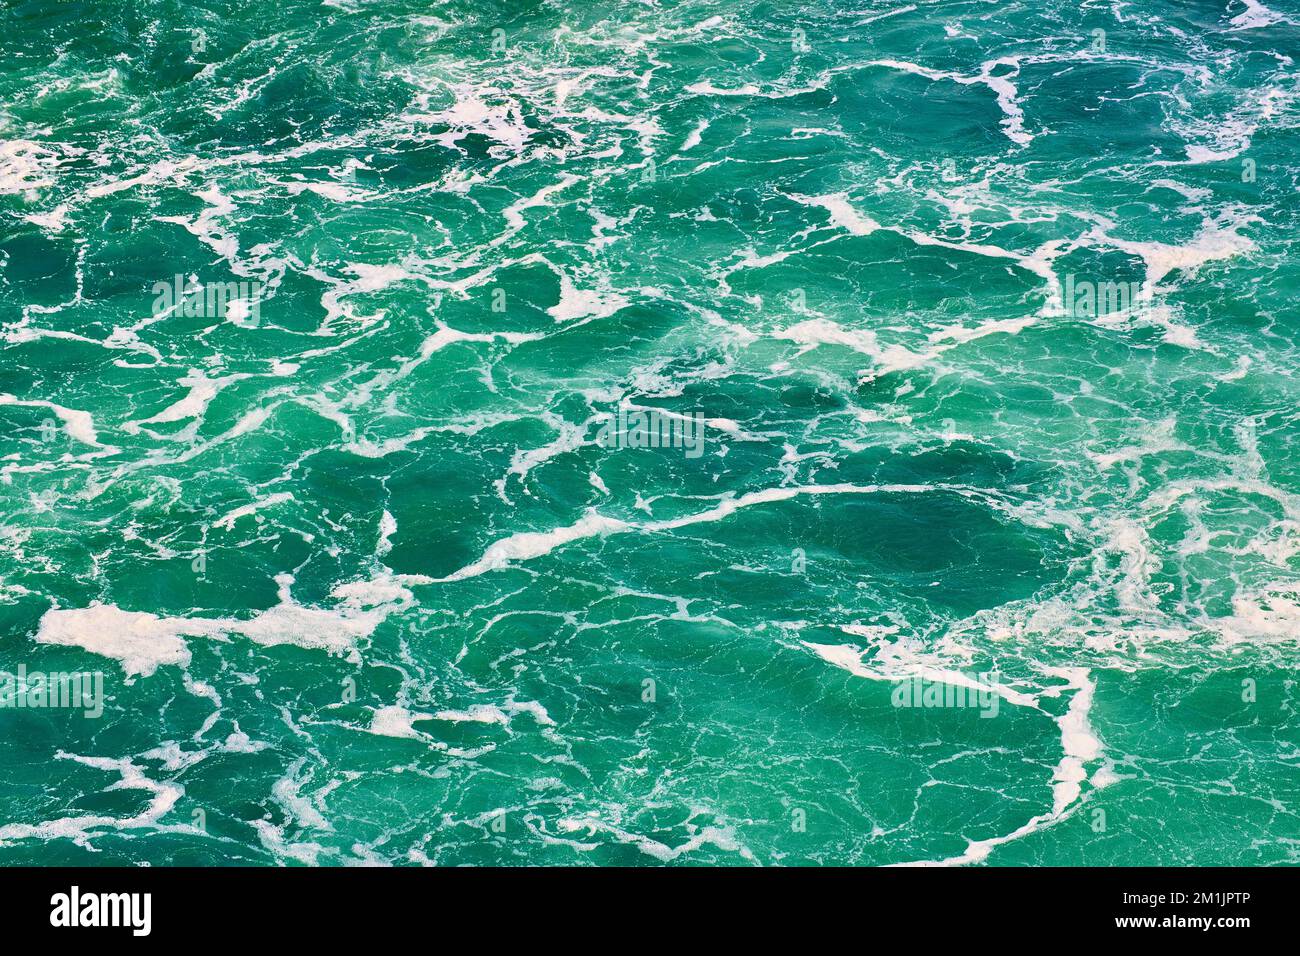 Choppy turquoise waters on the Niagara River Stock Photo